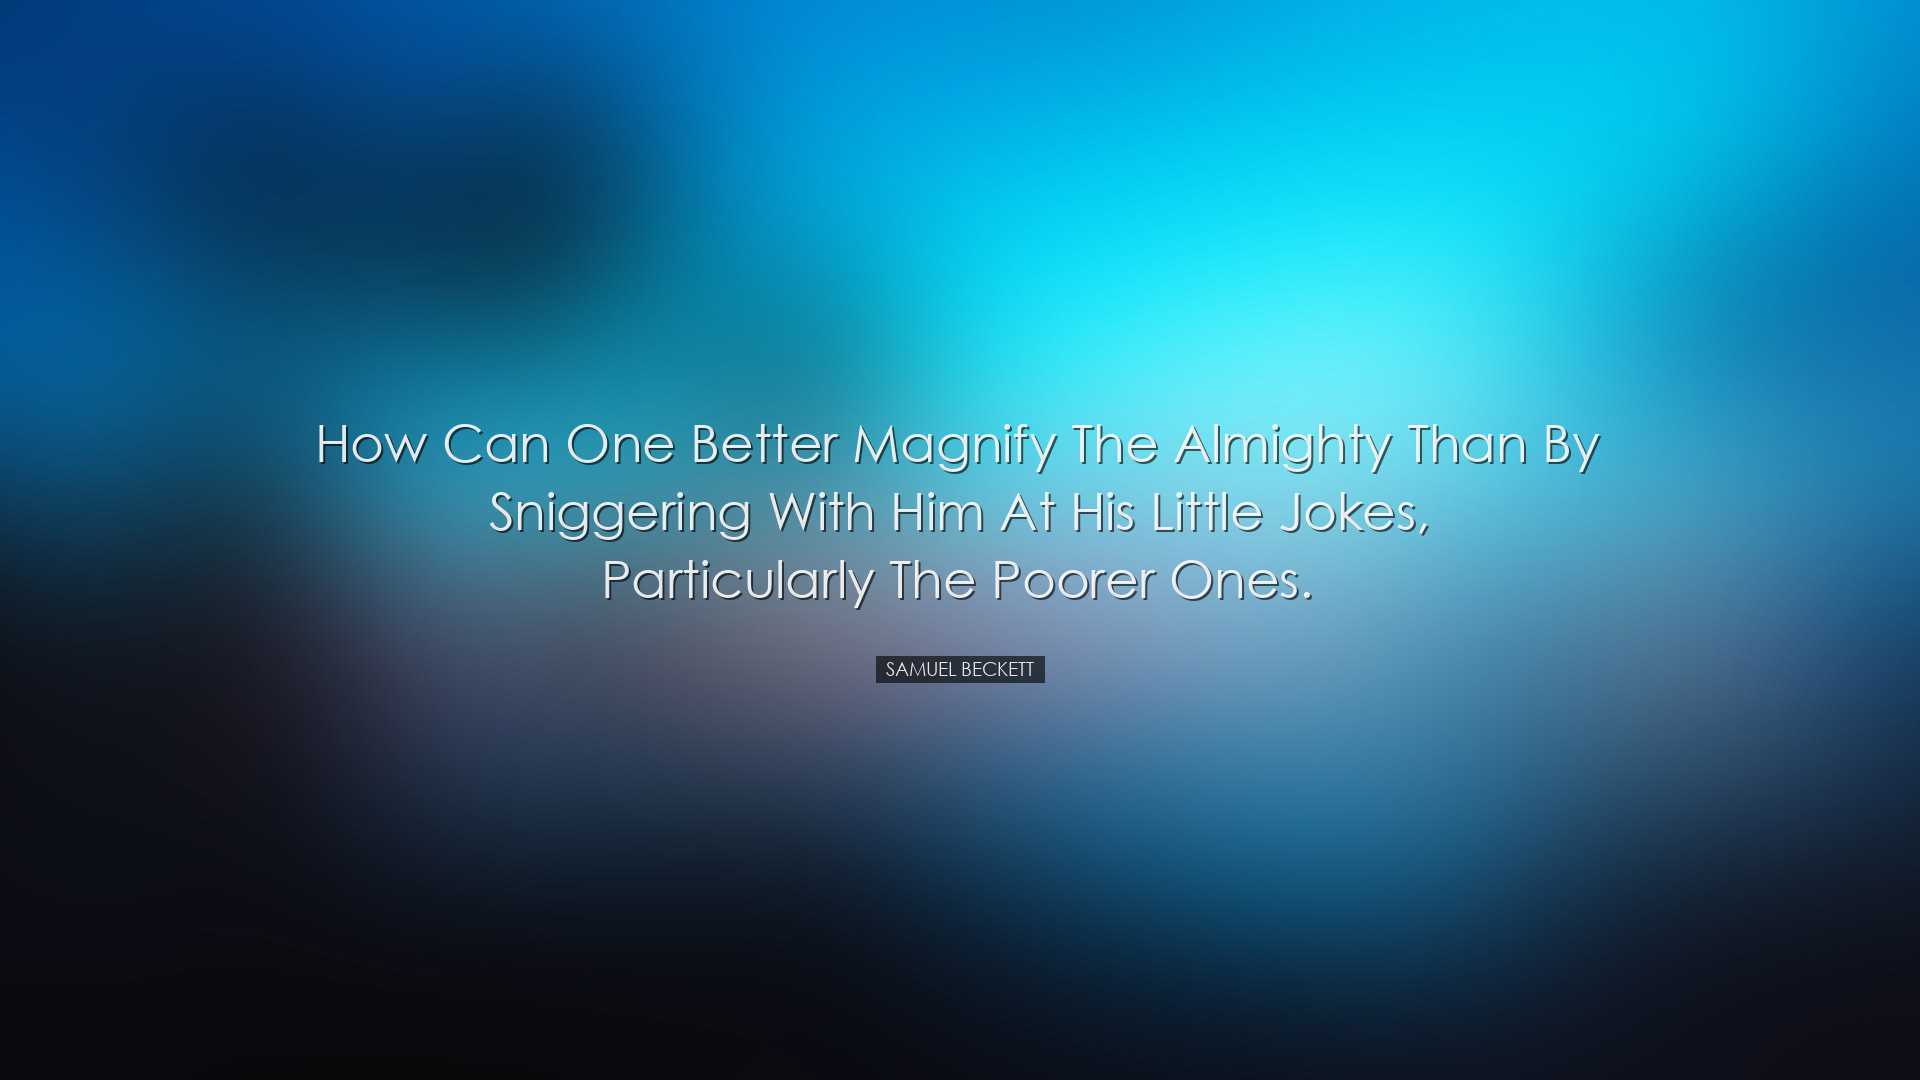 How can one better magnify the Almighty than by sniggering with hi